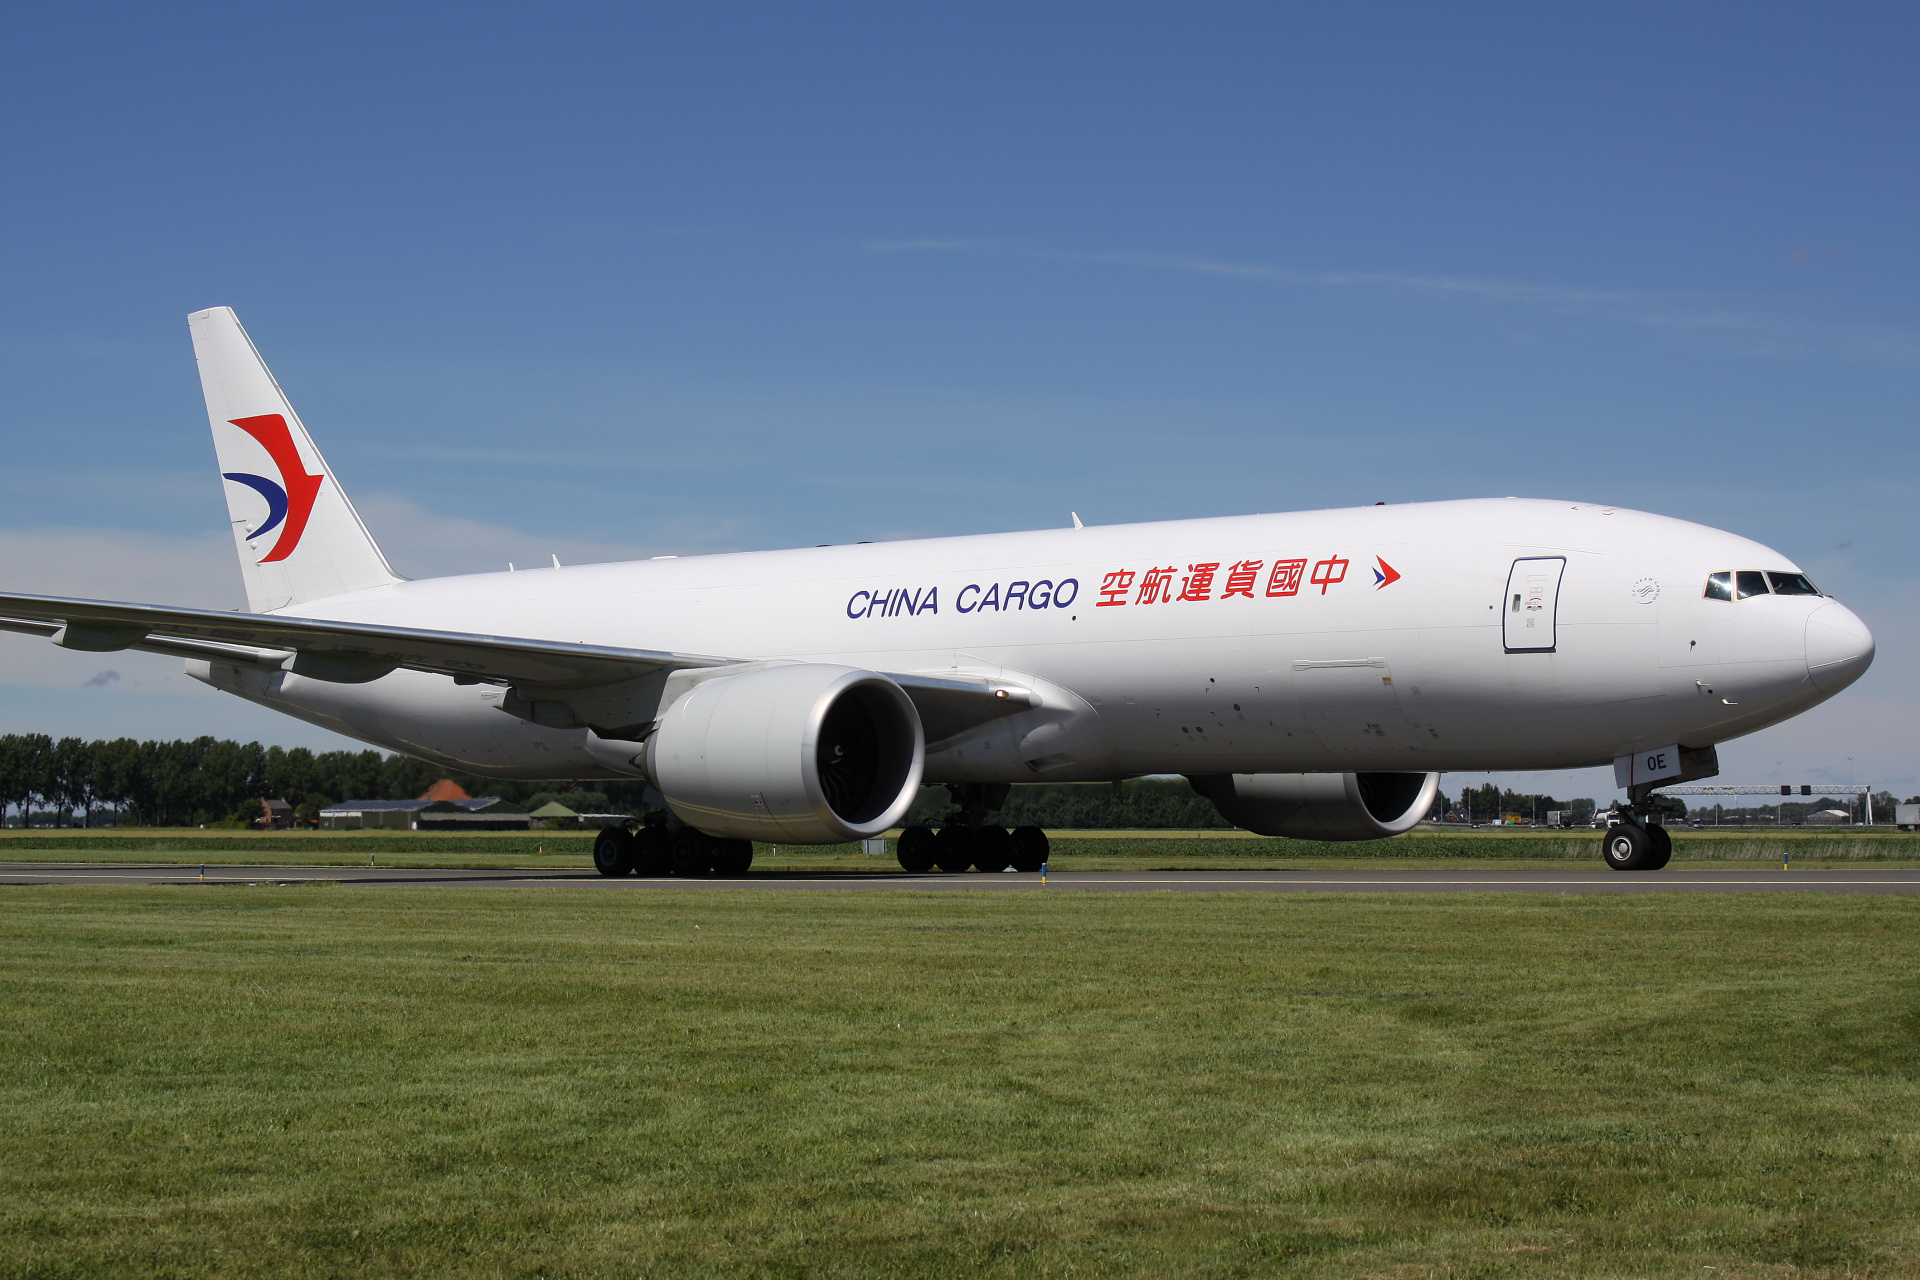 B-220E, China Cargo Airlines (Aircraft » Schiphol Spotting » Boeing 777F)